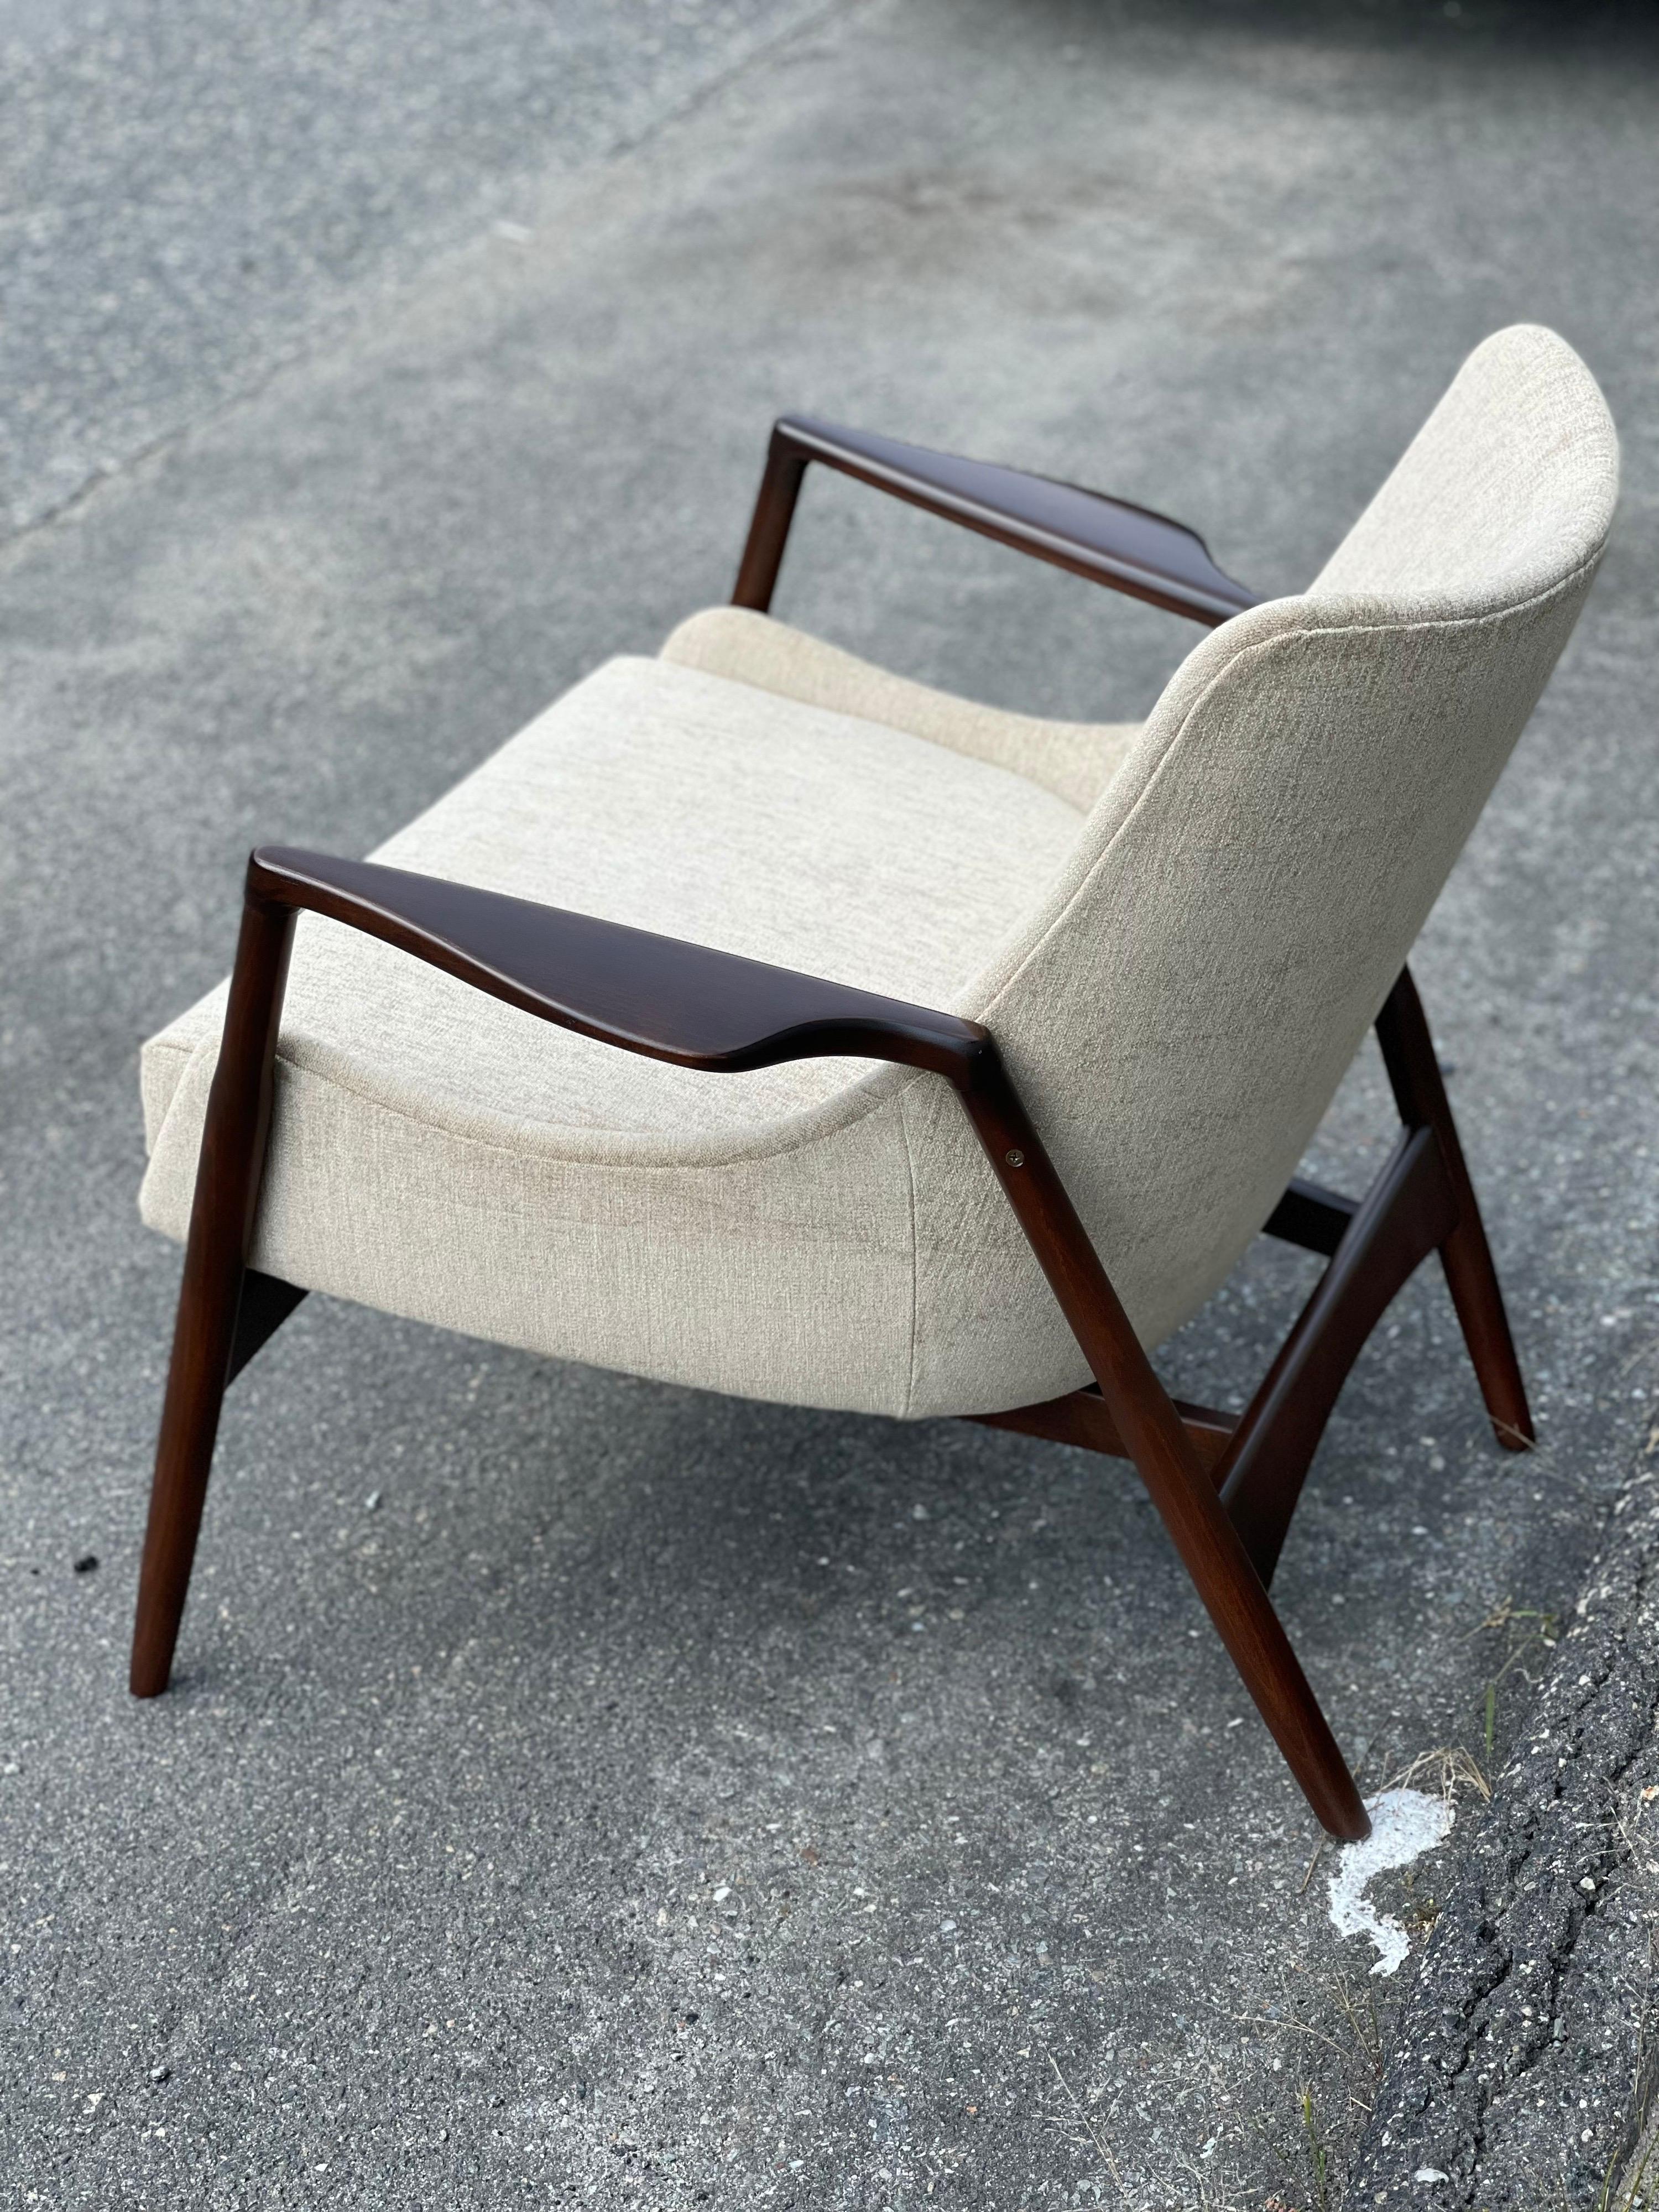 Mid-20th Century Danish Modern Lounge Chair by Kofod-Larsen for Selig